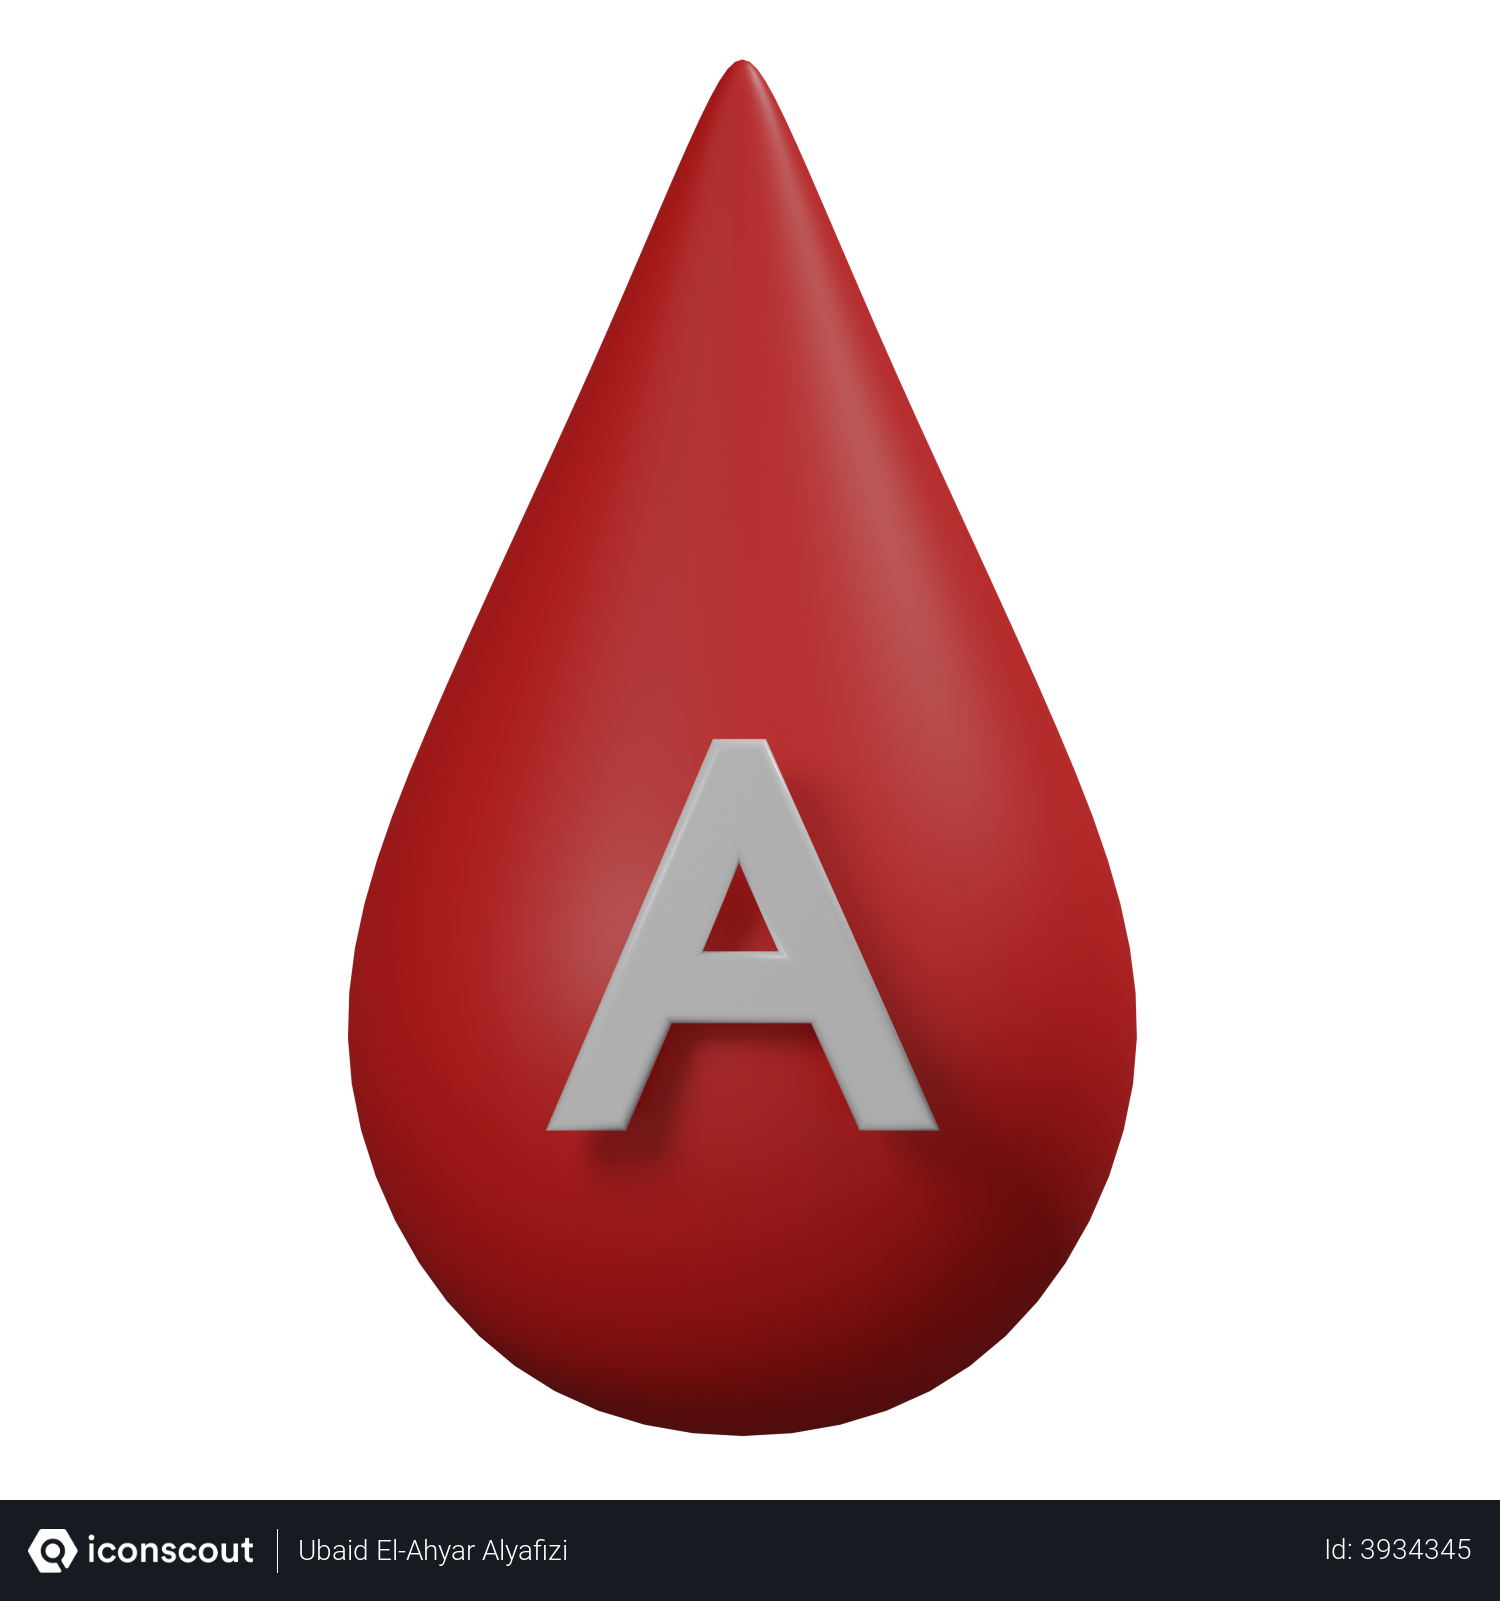 What's Your Blood Type? | Middlesex Health // Middlesex Health